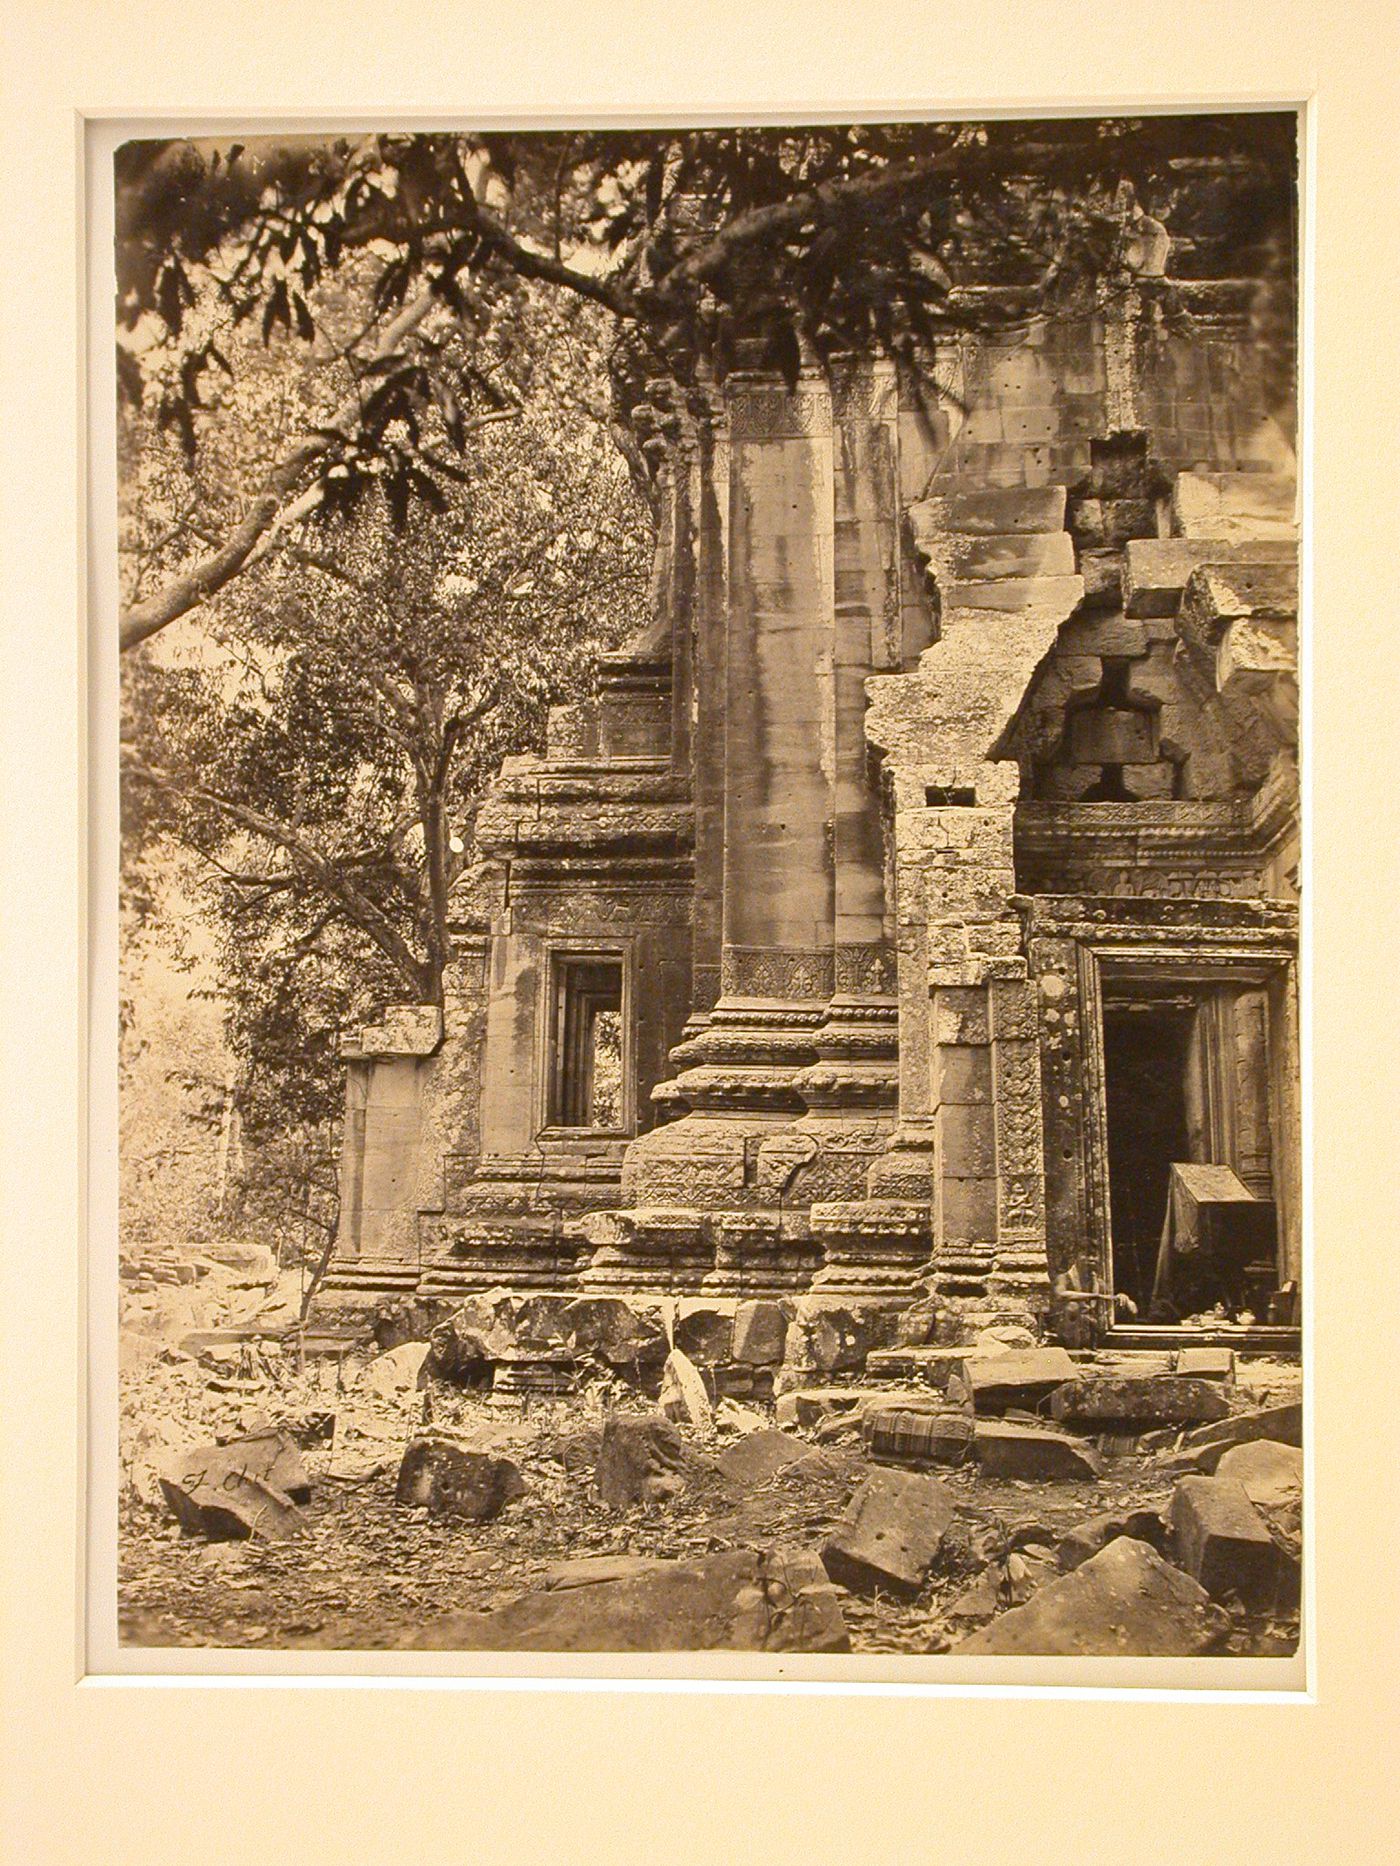 Partial view of the ruins of the `Utthayan Prawattisat Phimai (also known as Prasat Hin Phimai) temple, Phimai, Nakhon Ratchasima  Province (also known as Khorat Province), Siam (now Thailand)